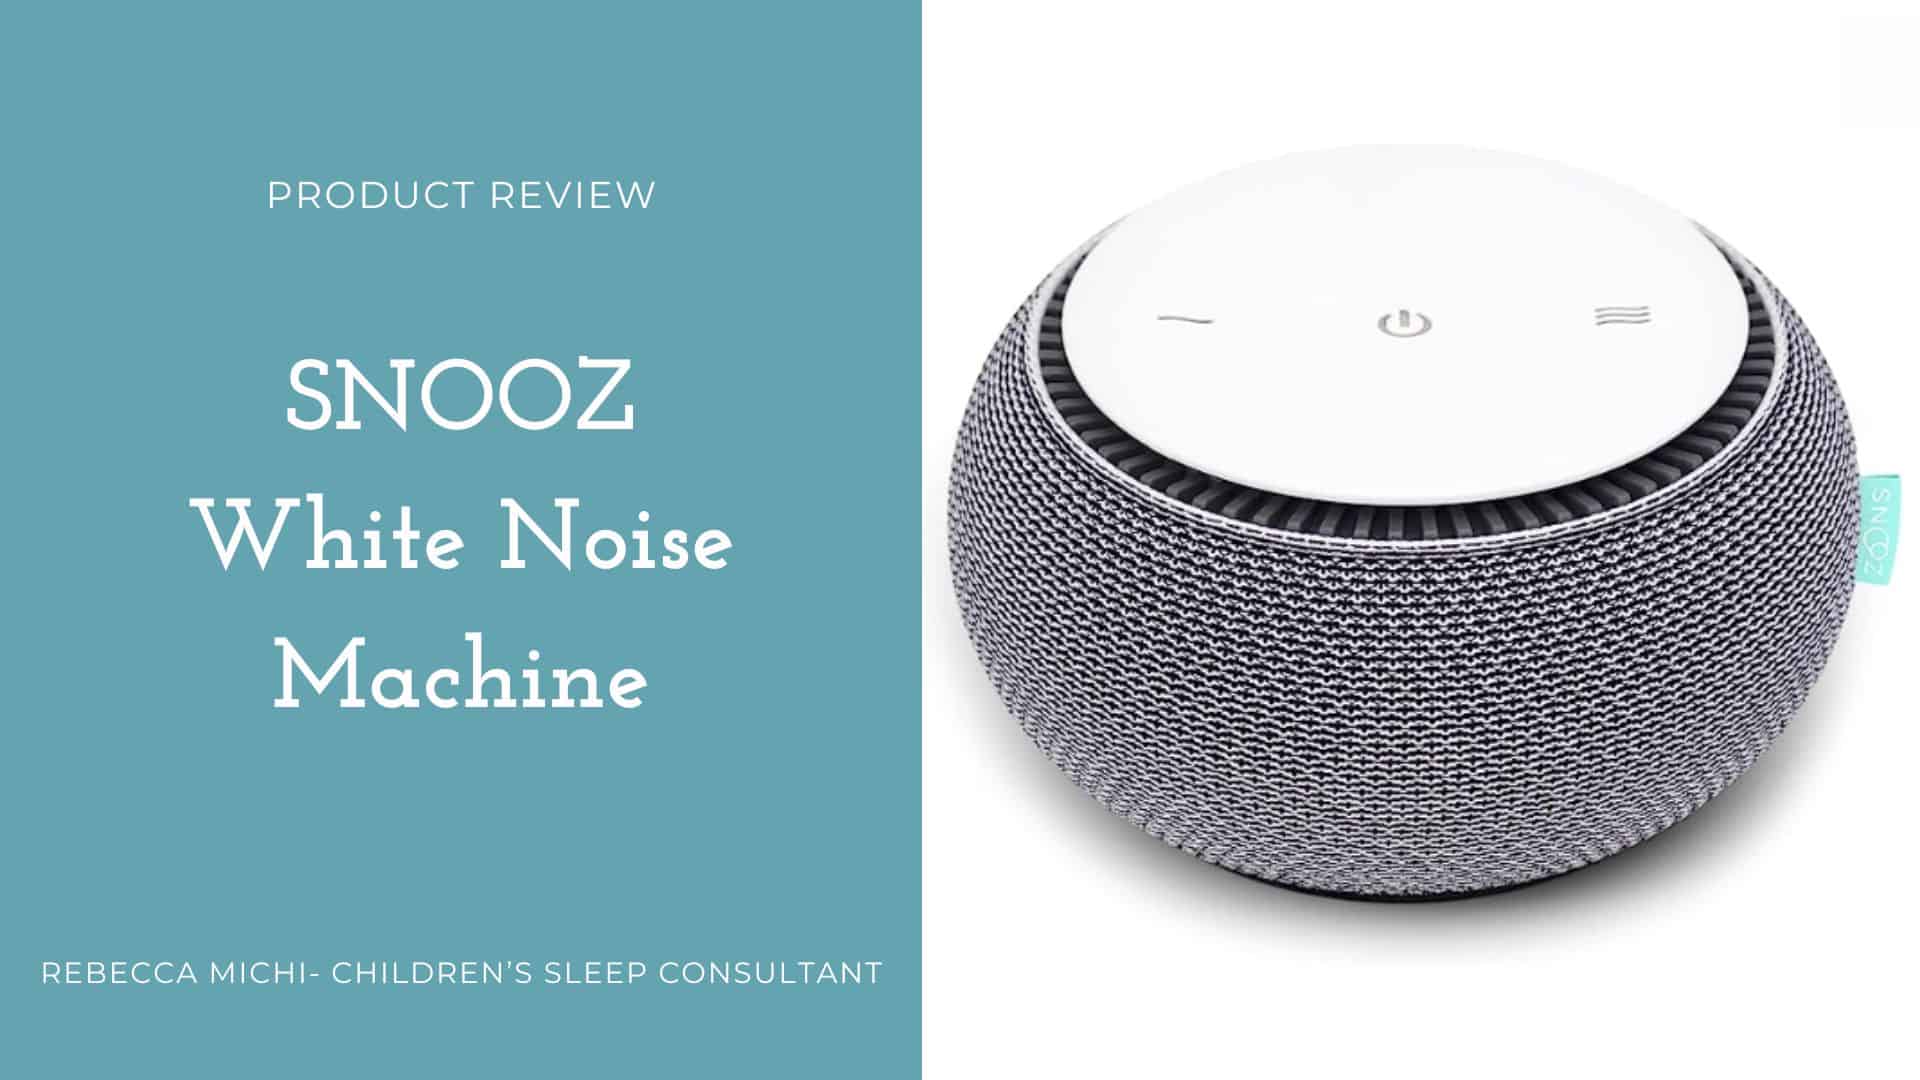 PRODUCT REVIEW SNOOZ